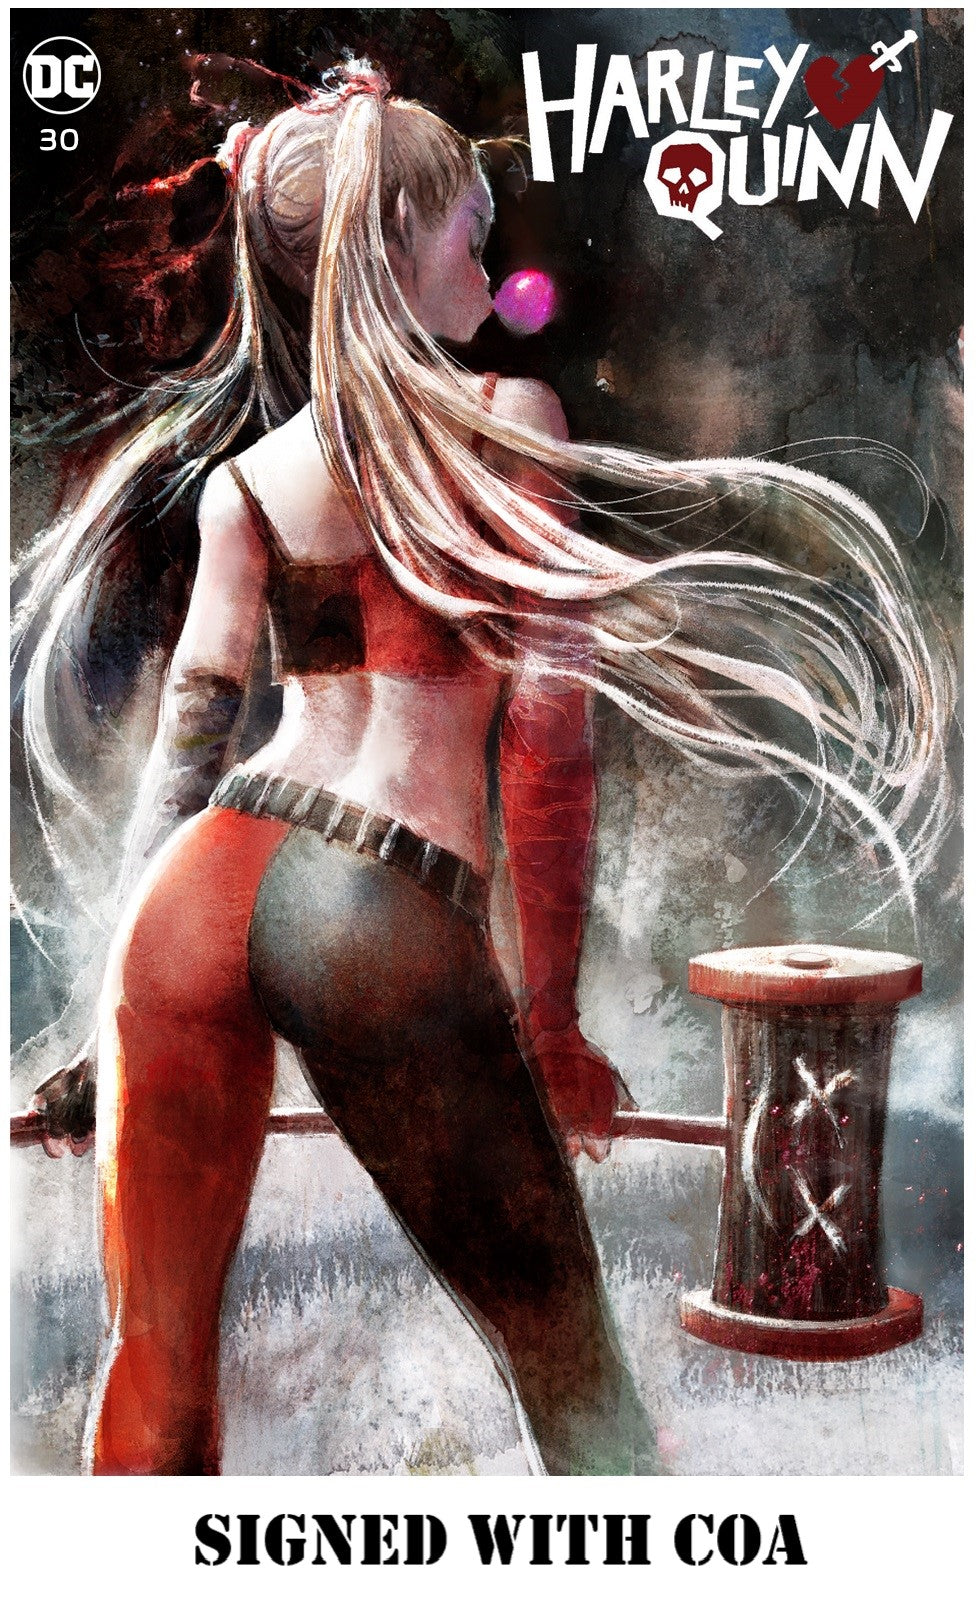 HARLEY QUINN #30 SEB MCKINNON VARIANT LIMITED TO 800 COPIES WITH NUMBERED COA SIGNED WITH COA